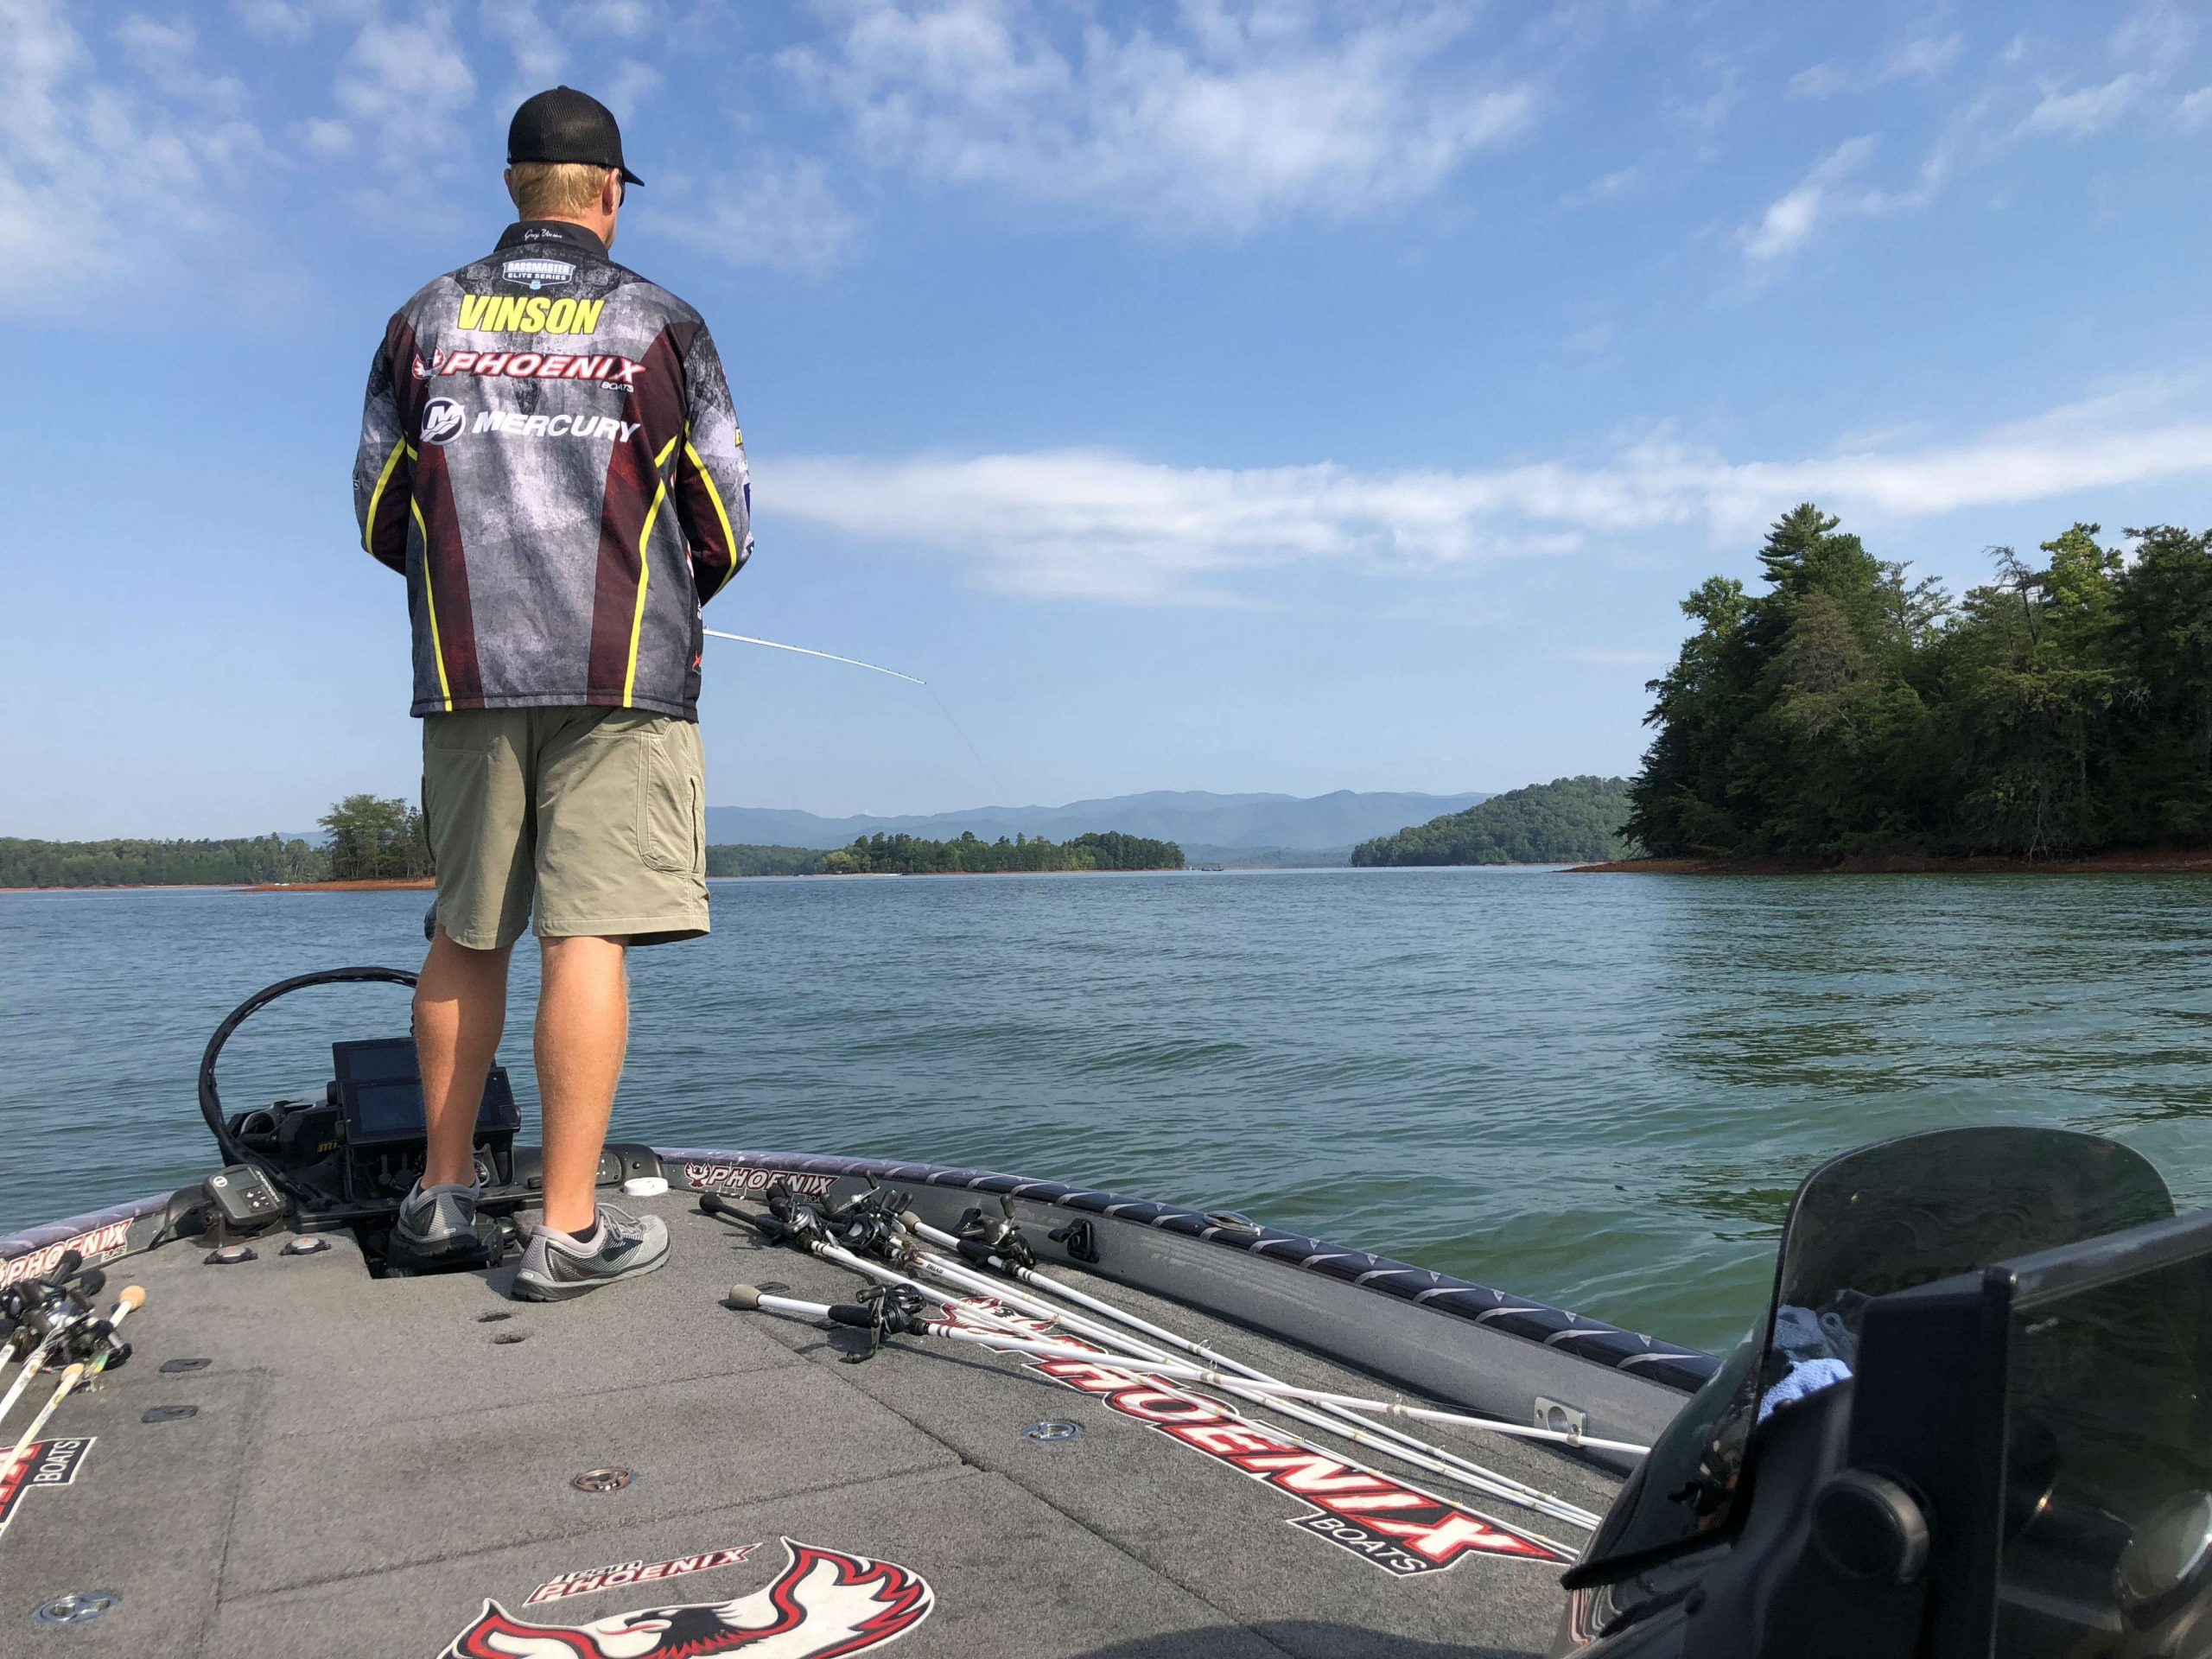 After a morning spent shallow and several short-strikes, Greg Vinson has moved out deep for spotted bass. He now has two fish in the boat weighing just shy of 5-pounds. 